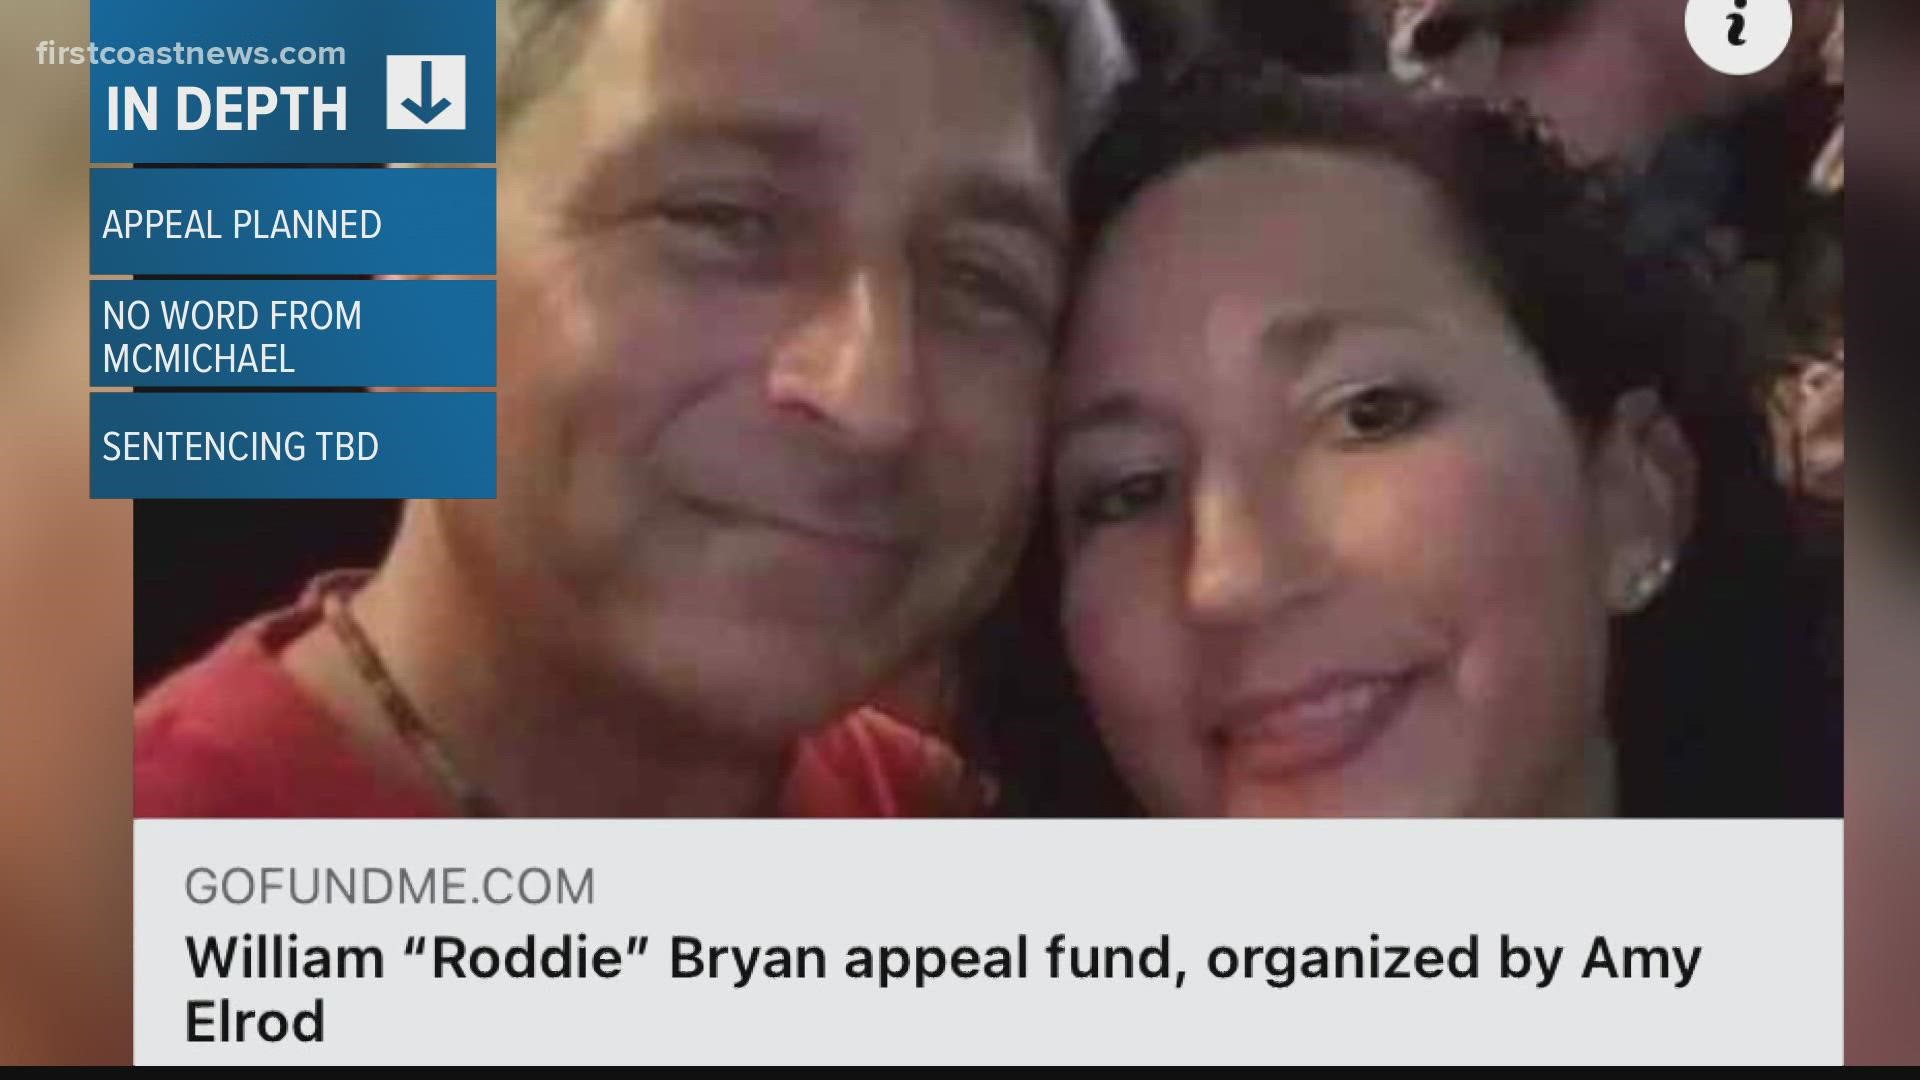 The fiance of William 'Roddie' Bryan created the page to raise money for her husband's appeal.